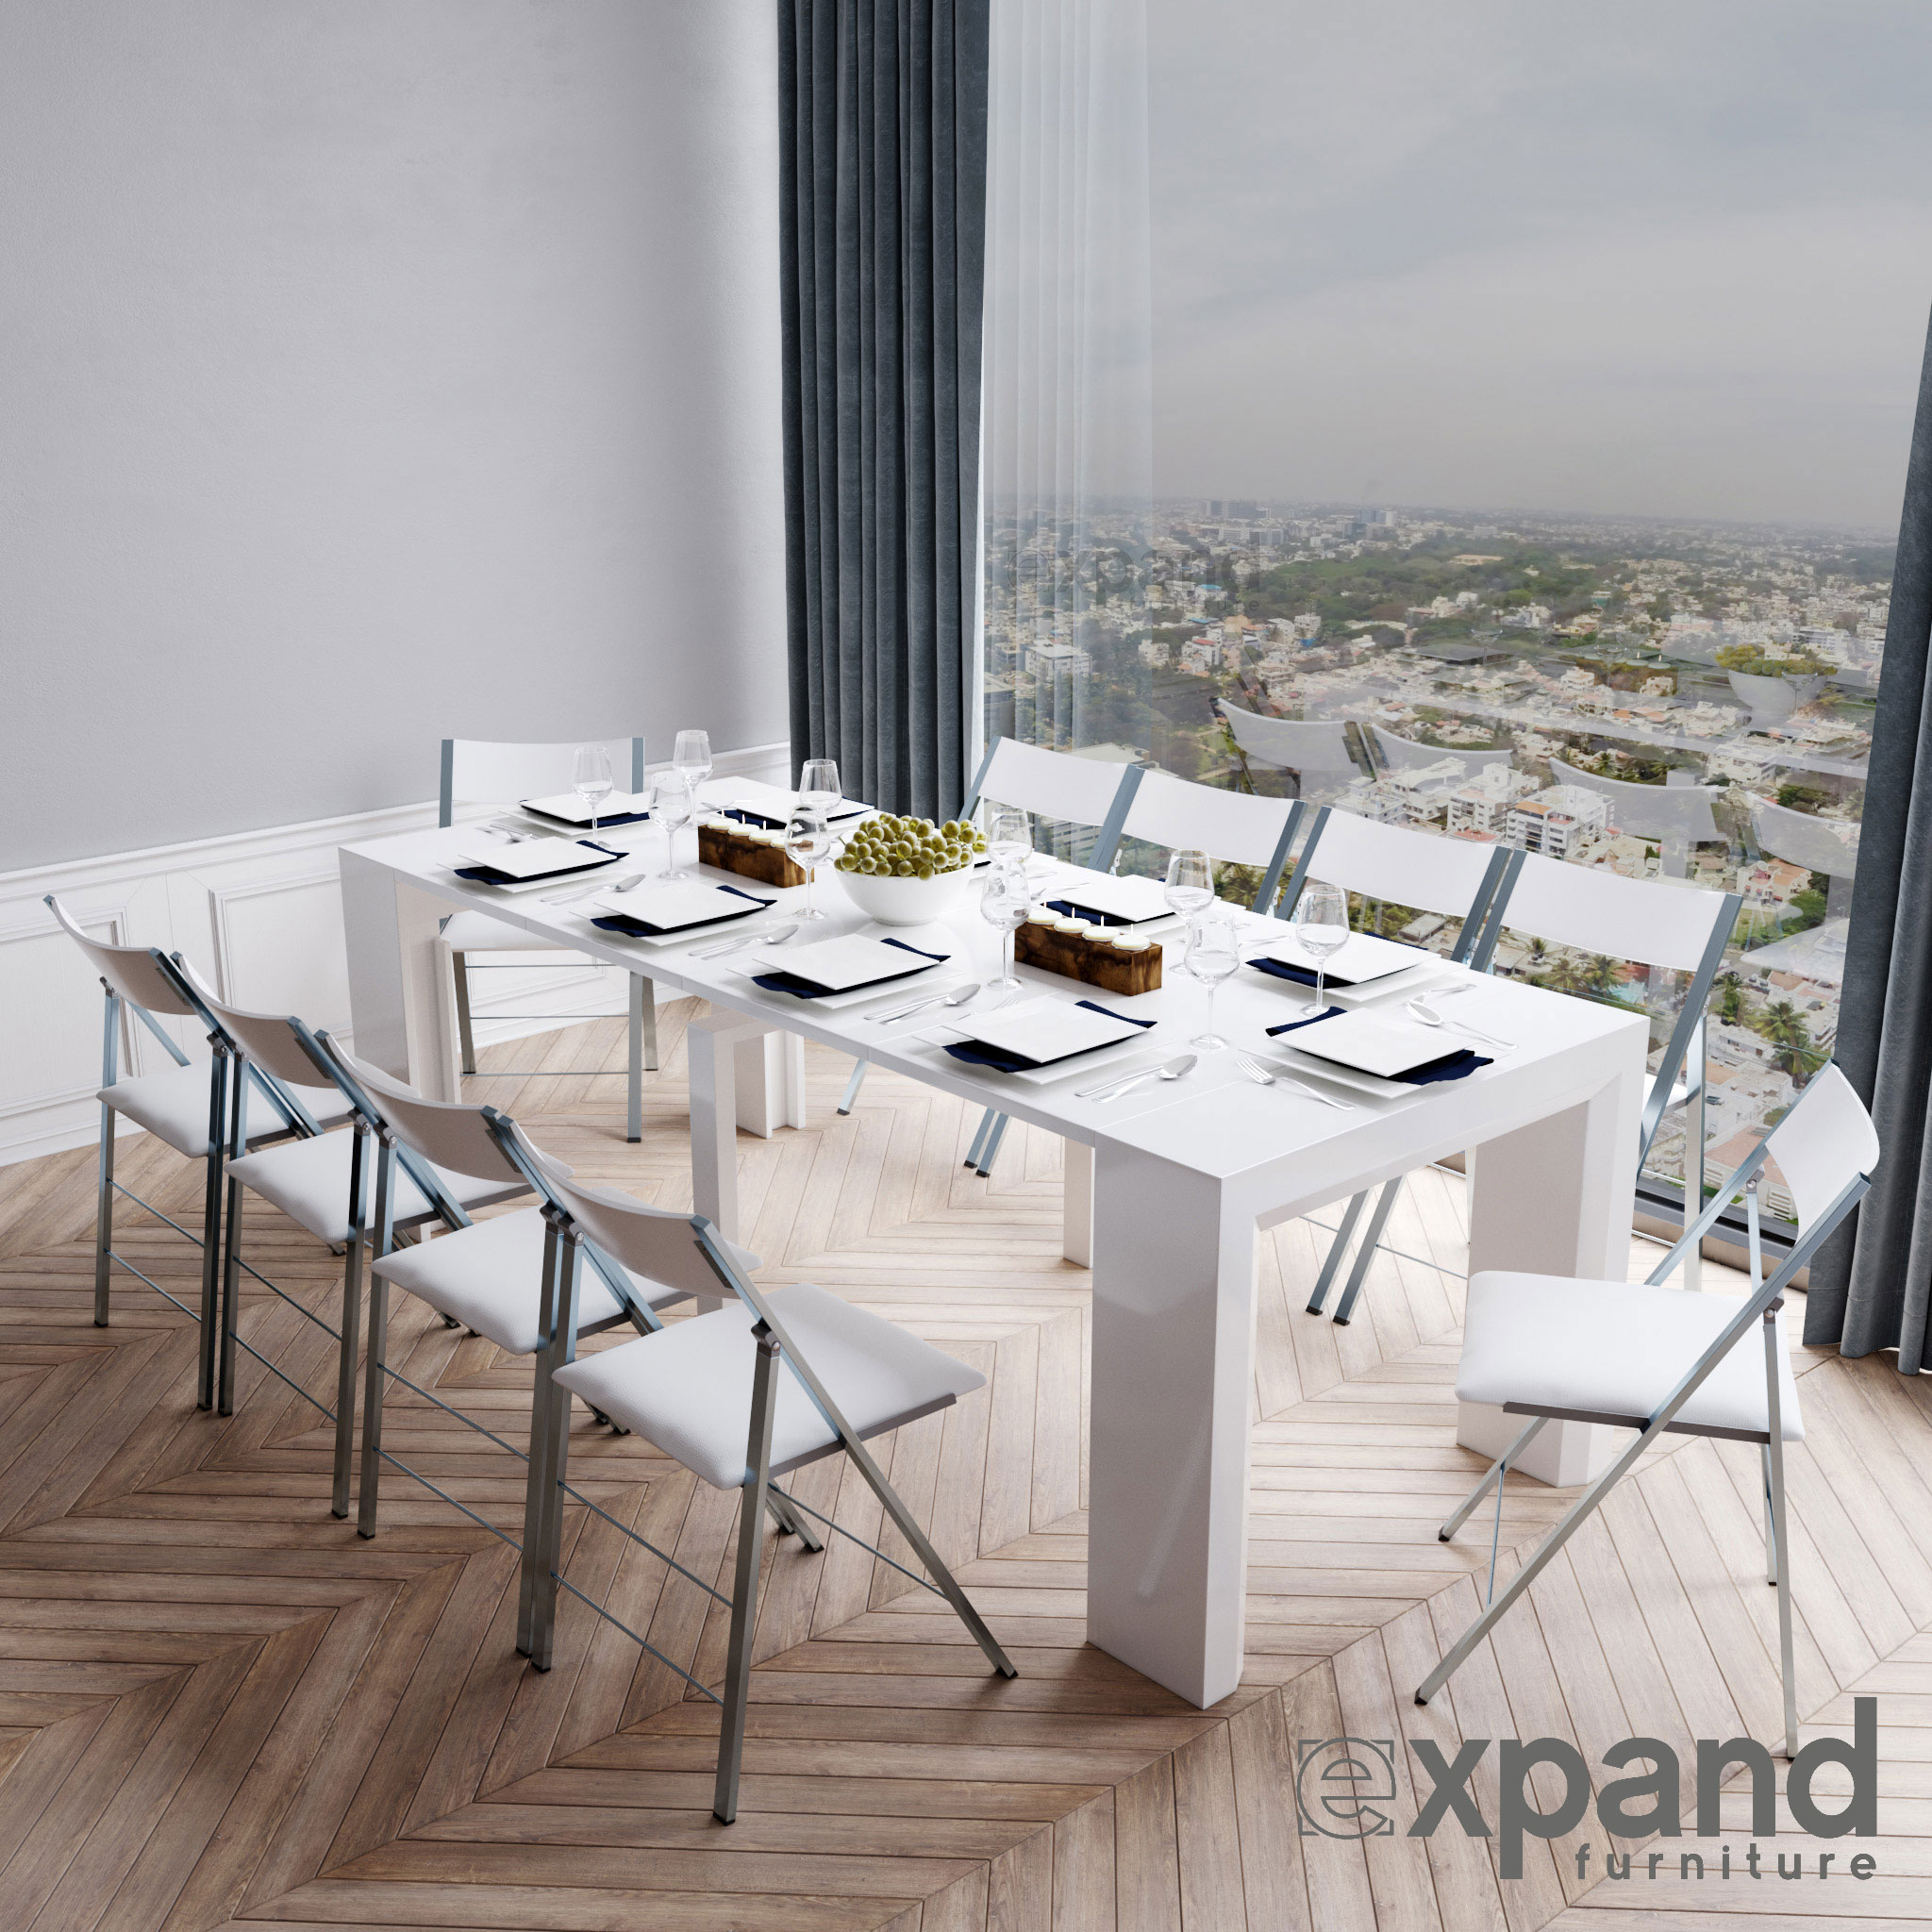 Stylish High Quality Folding Extending Chairs By Expand Furniture